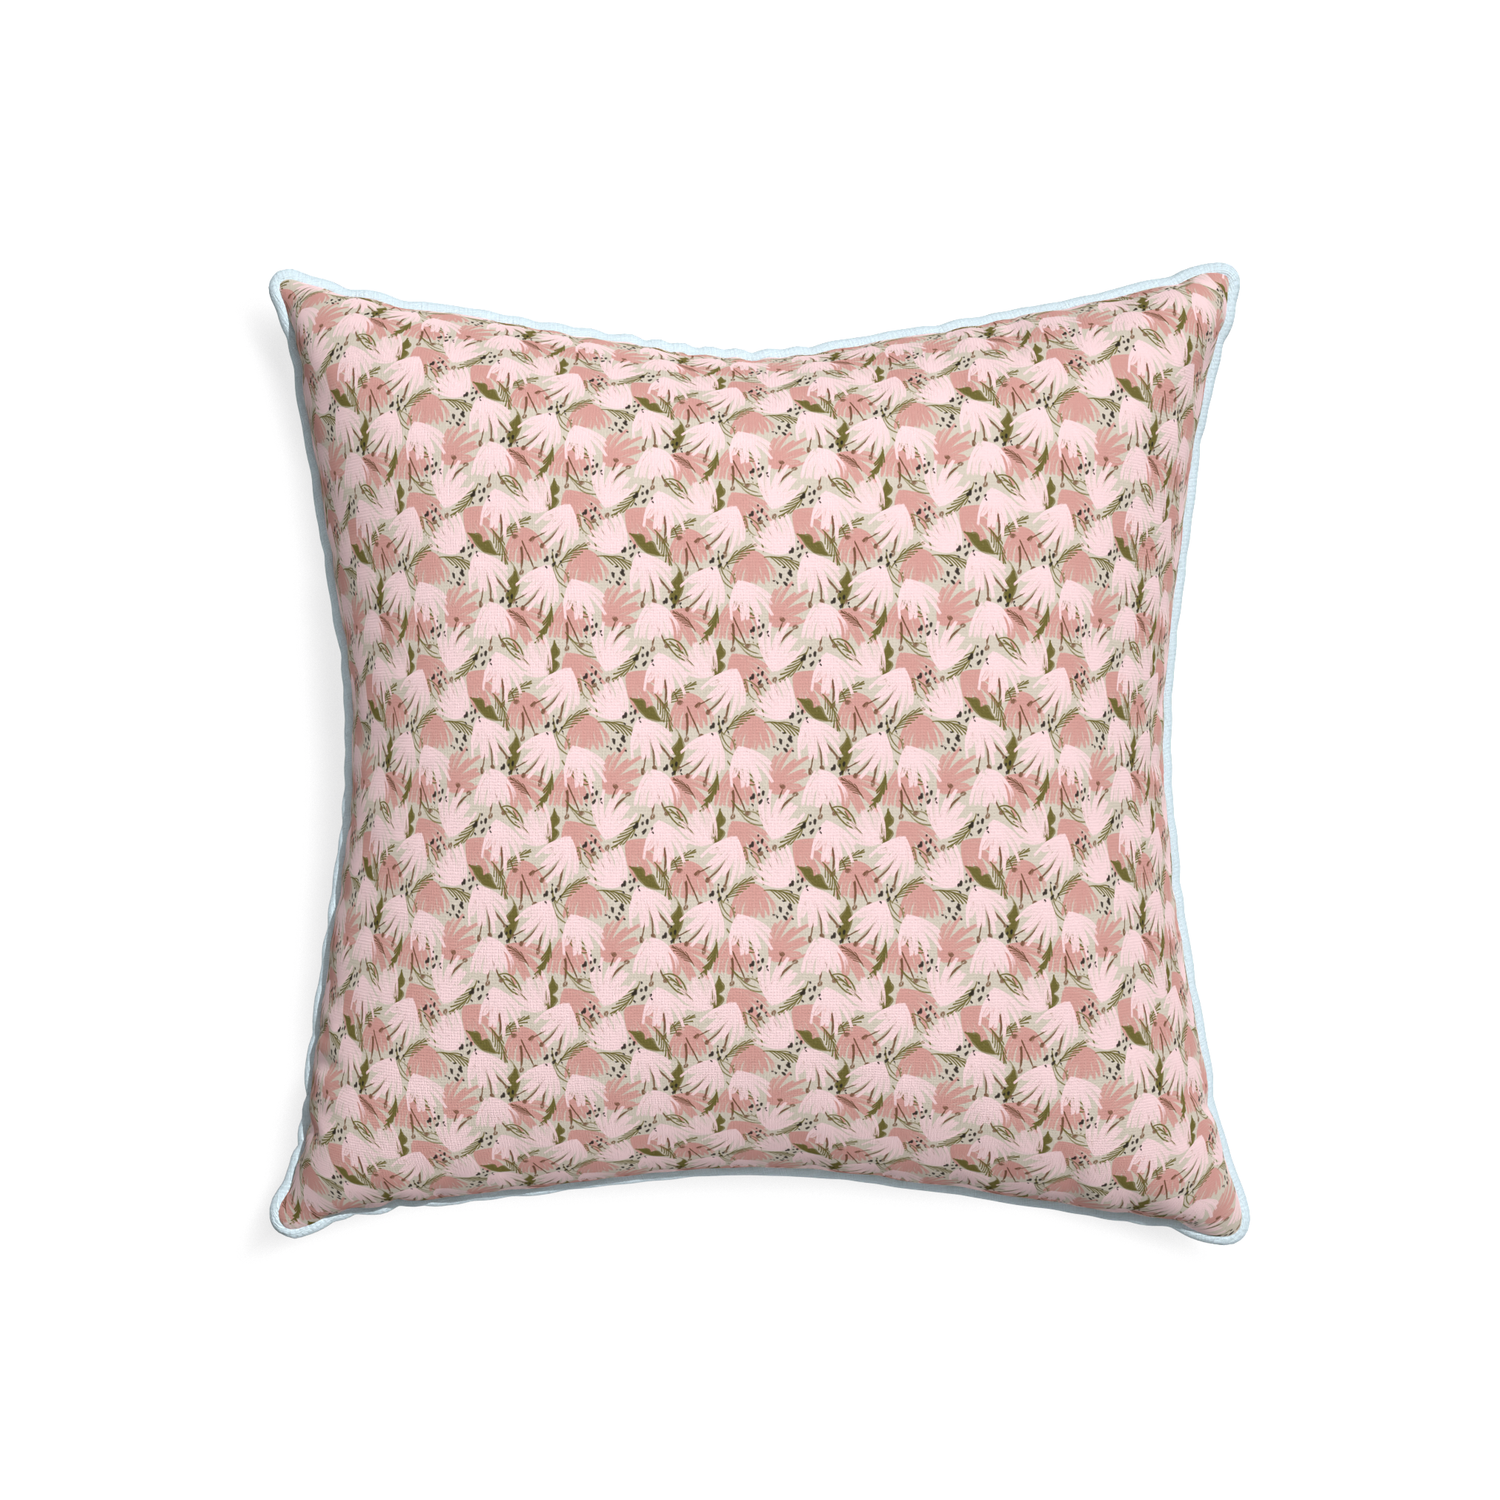 22-square eden pink custom pillow with powder piping on white background